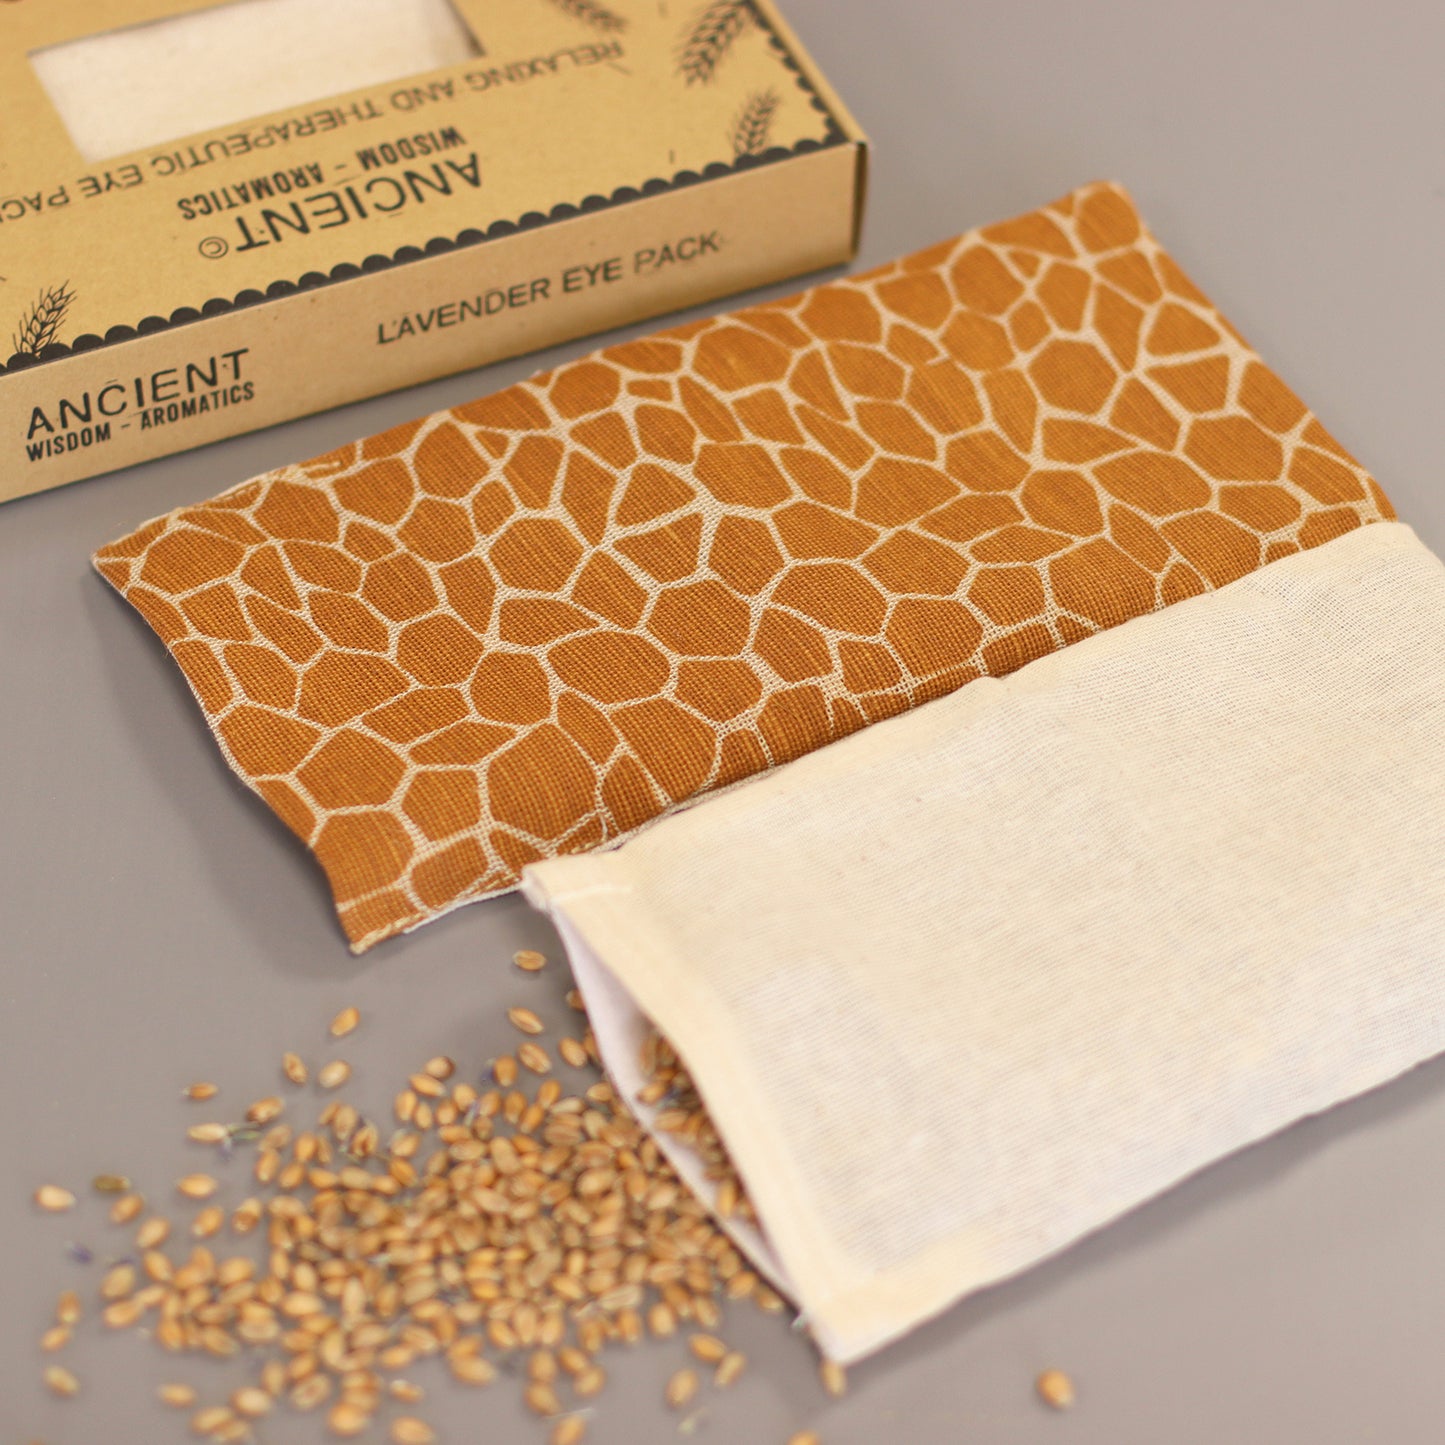 Lavender Natural Cotton and Juco Eye Pillow/Mask - Madagascar Giraffe (UK Only)